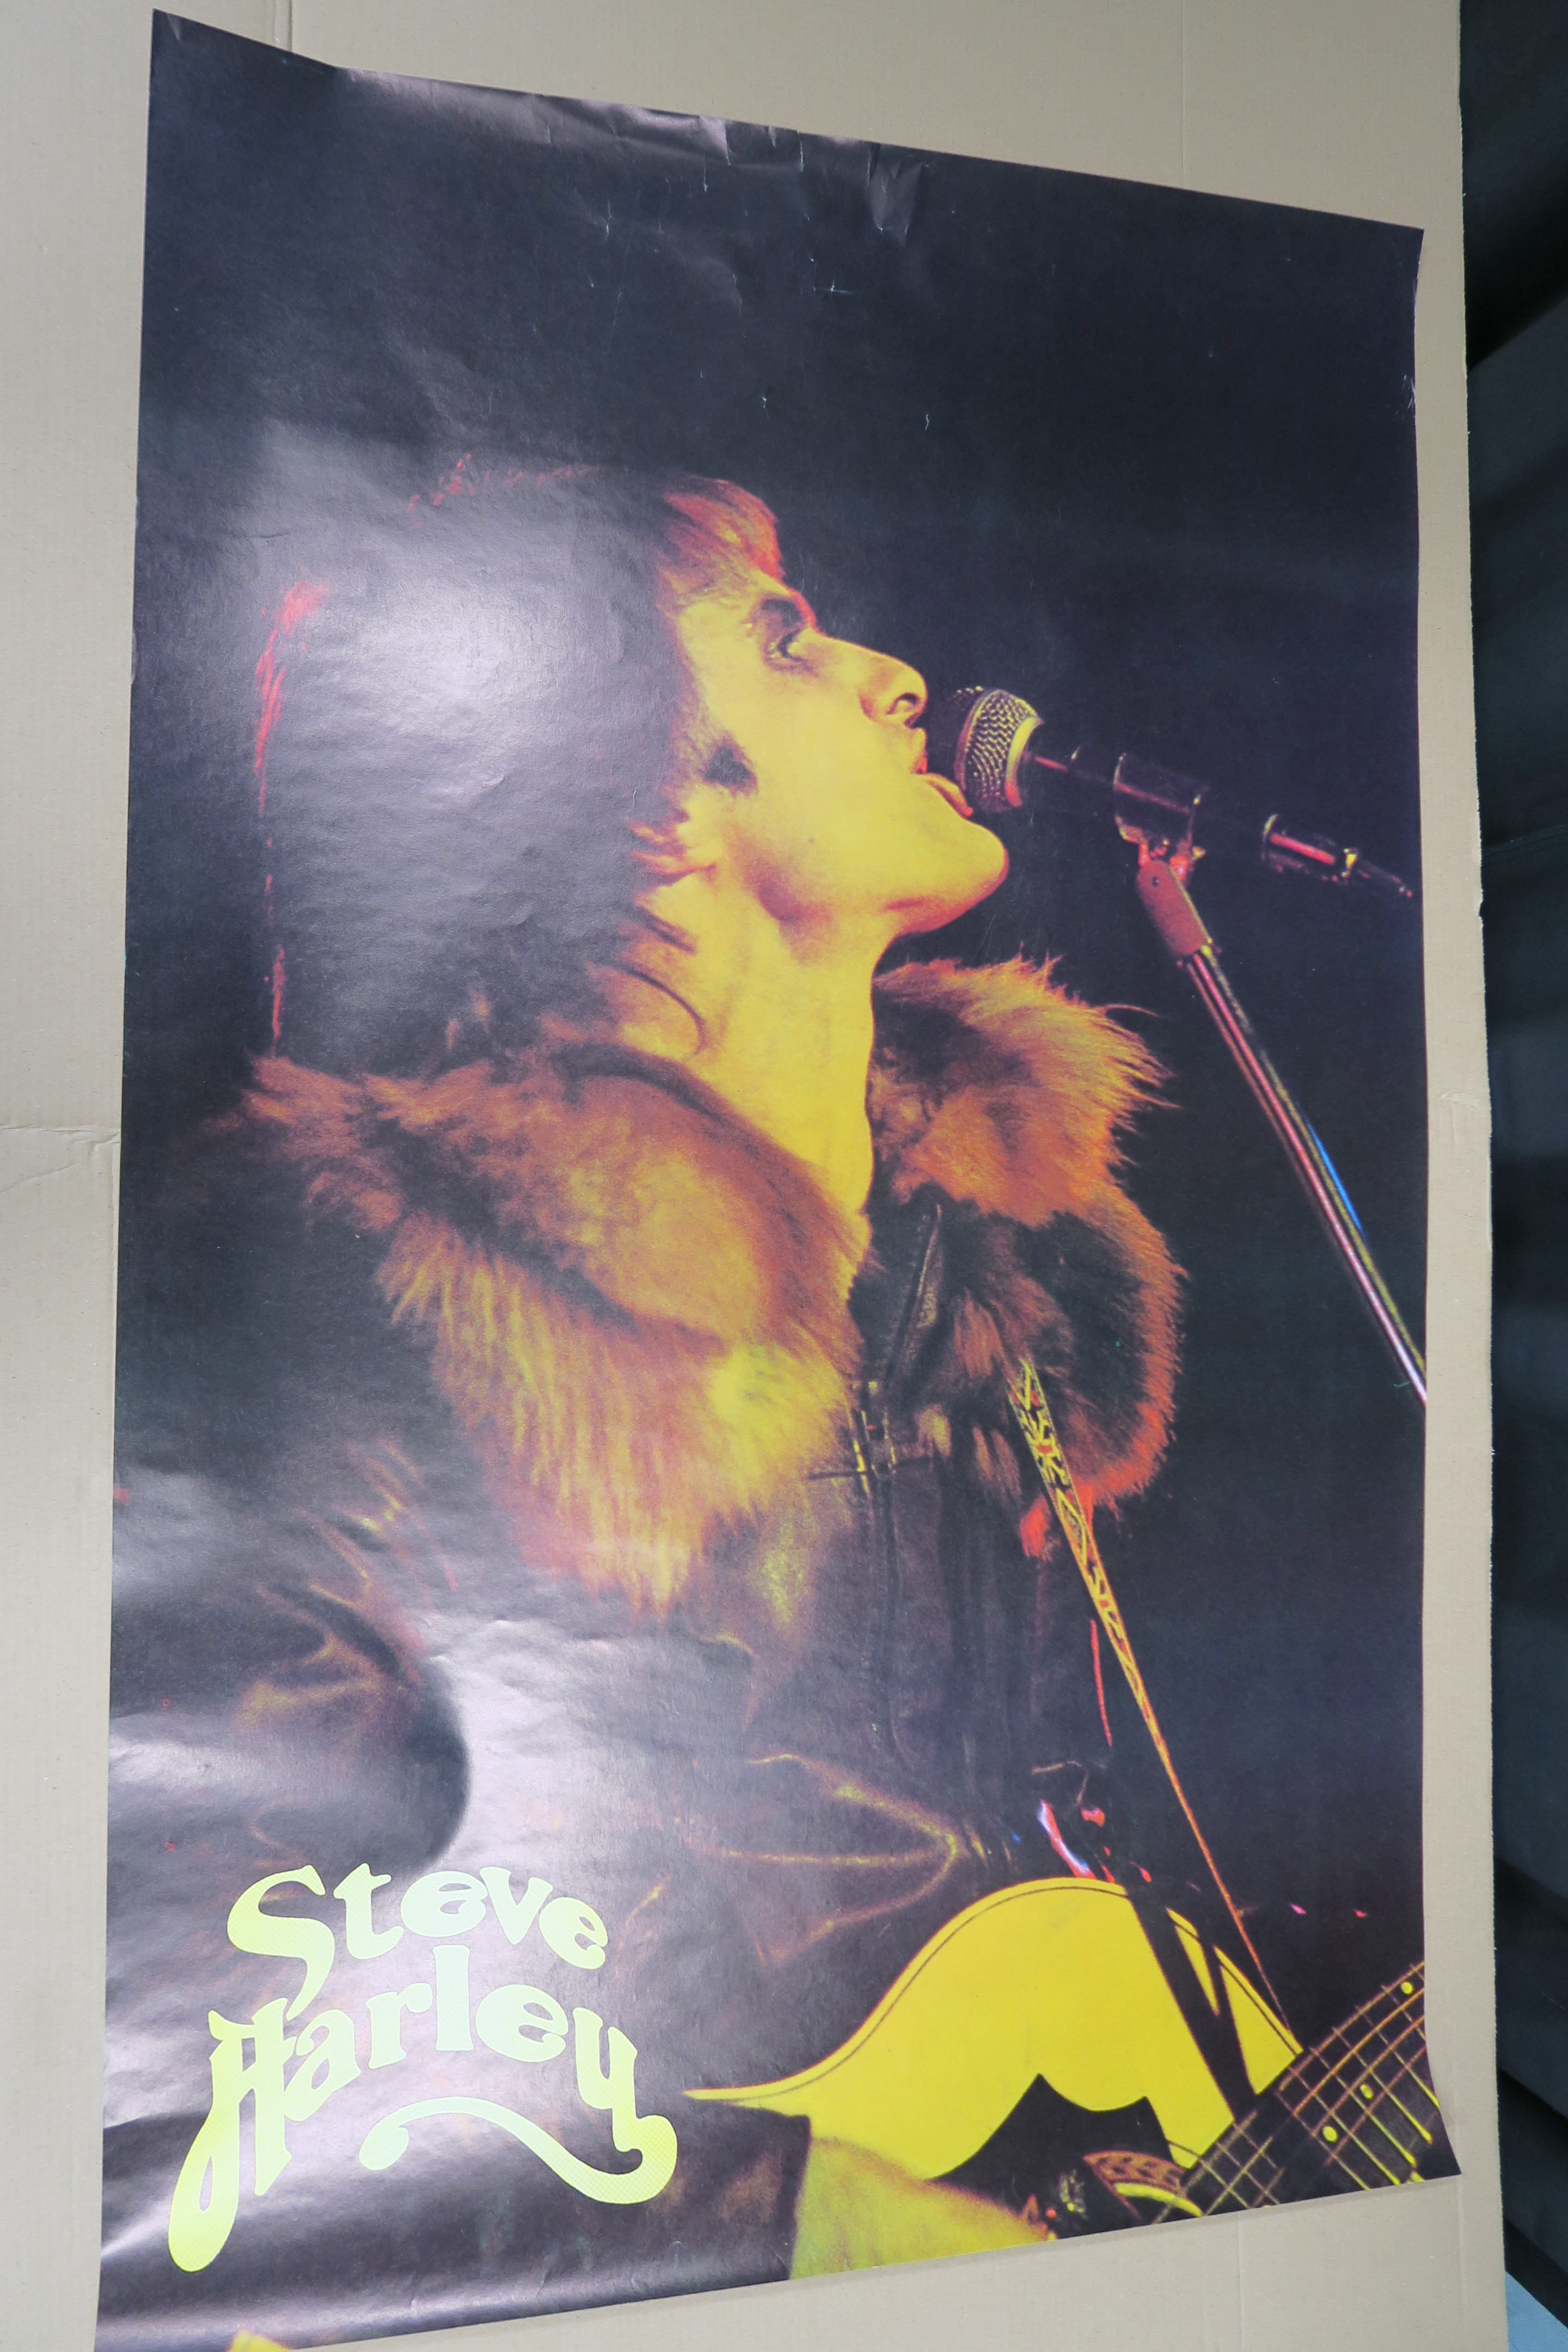 Concert posters including Steve Harley (rolled), Gong (rolled), The Groundhogs (rolled), Ryan Adams.